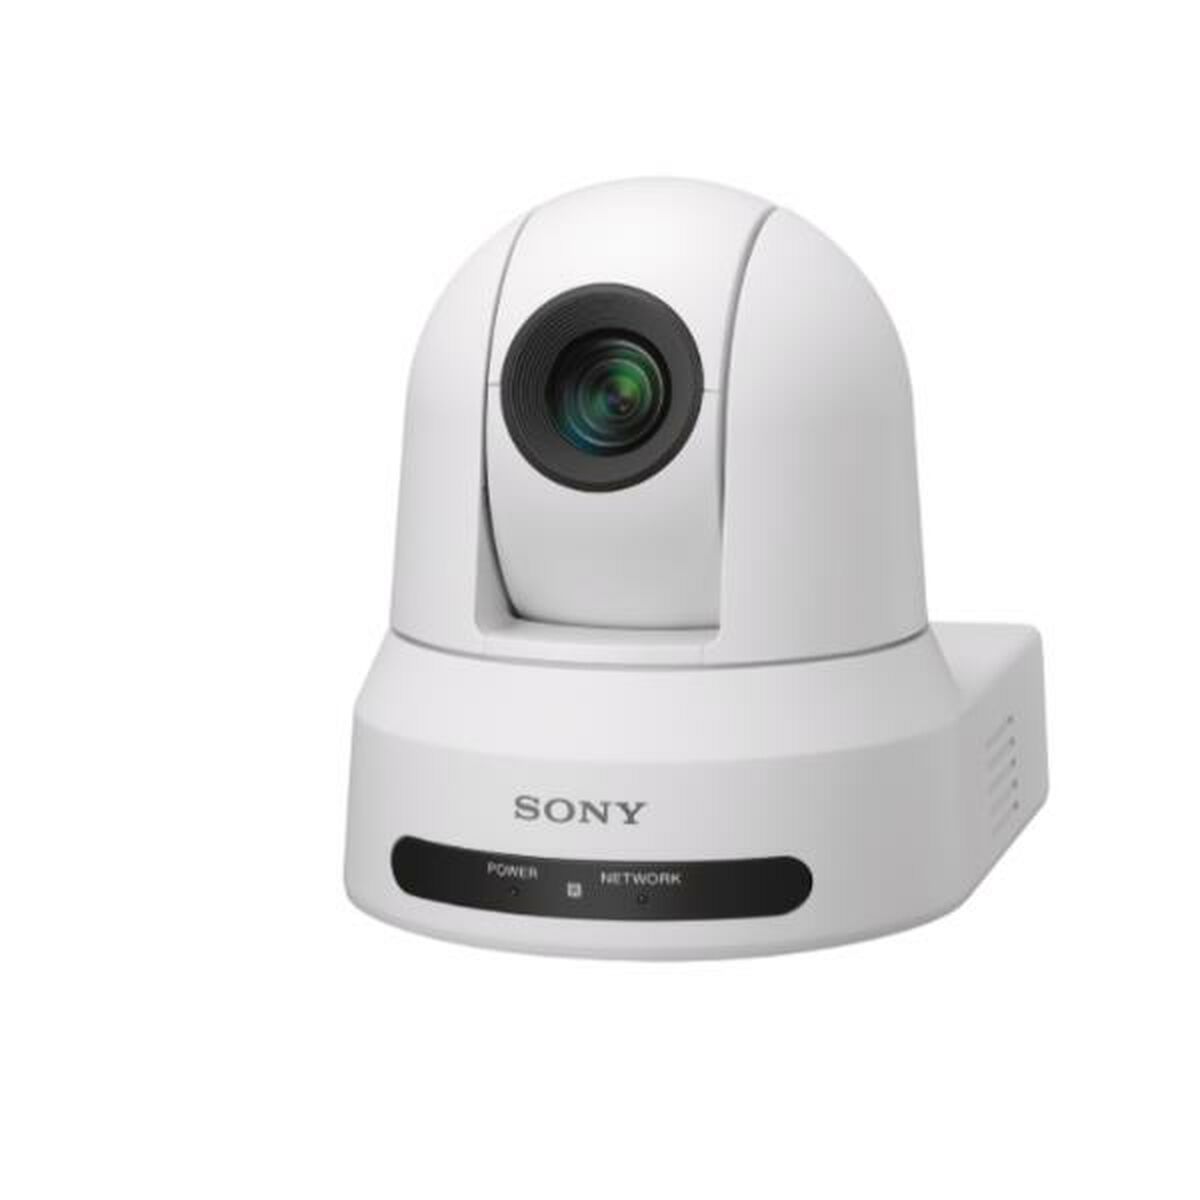 Webcam Sony SRG-X400WC, Sony, Computing, Accessories, webcam-sony-srg-x400wc, :Ultra HD, :Video Conferencing, :Webcam, Brand_Sony, category-reference-2609, category-reference-2642, category-reference-2844, category-reference-t-19685, category-reference-t-19908, category-reference-t-21340, category-reference-t-25568, computers / peripherals, Condition_NEW, office, Price_+ 1000, Teleworking, RiotNook